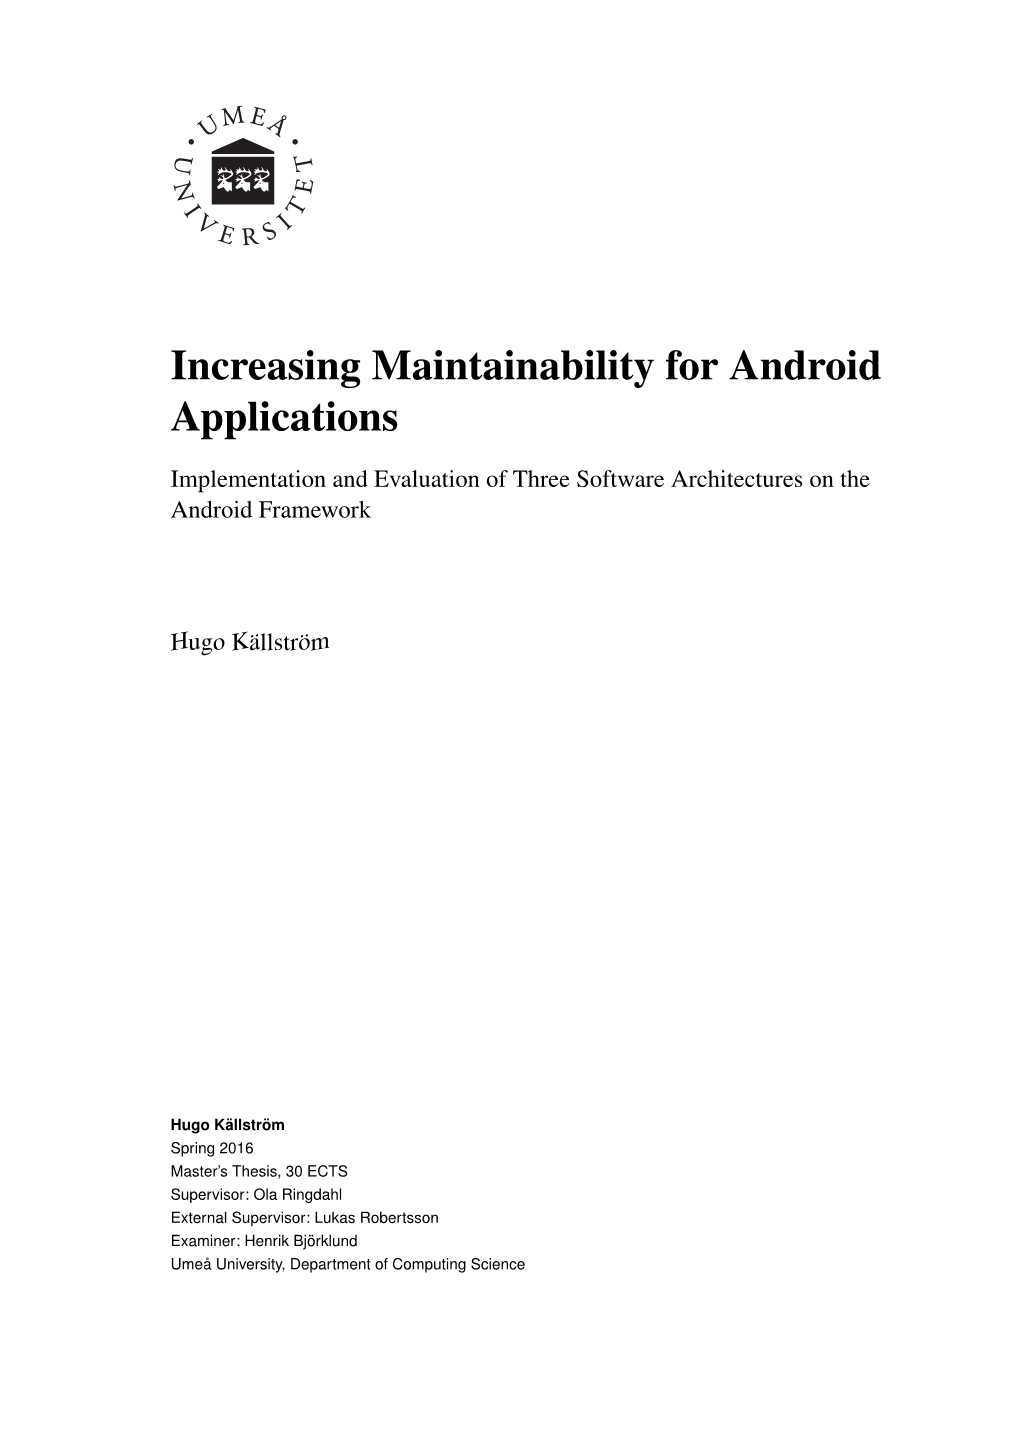 Increasing Maintainability for Android Applications